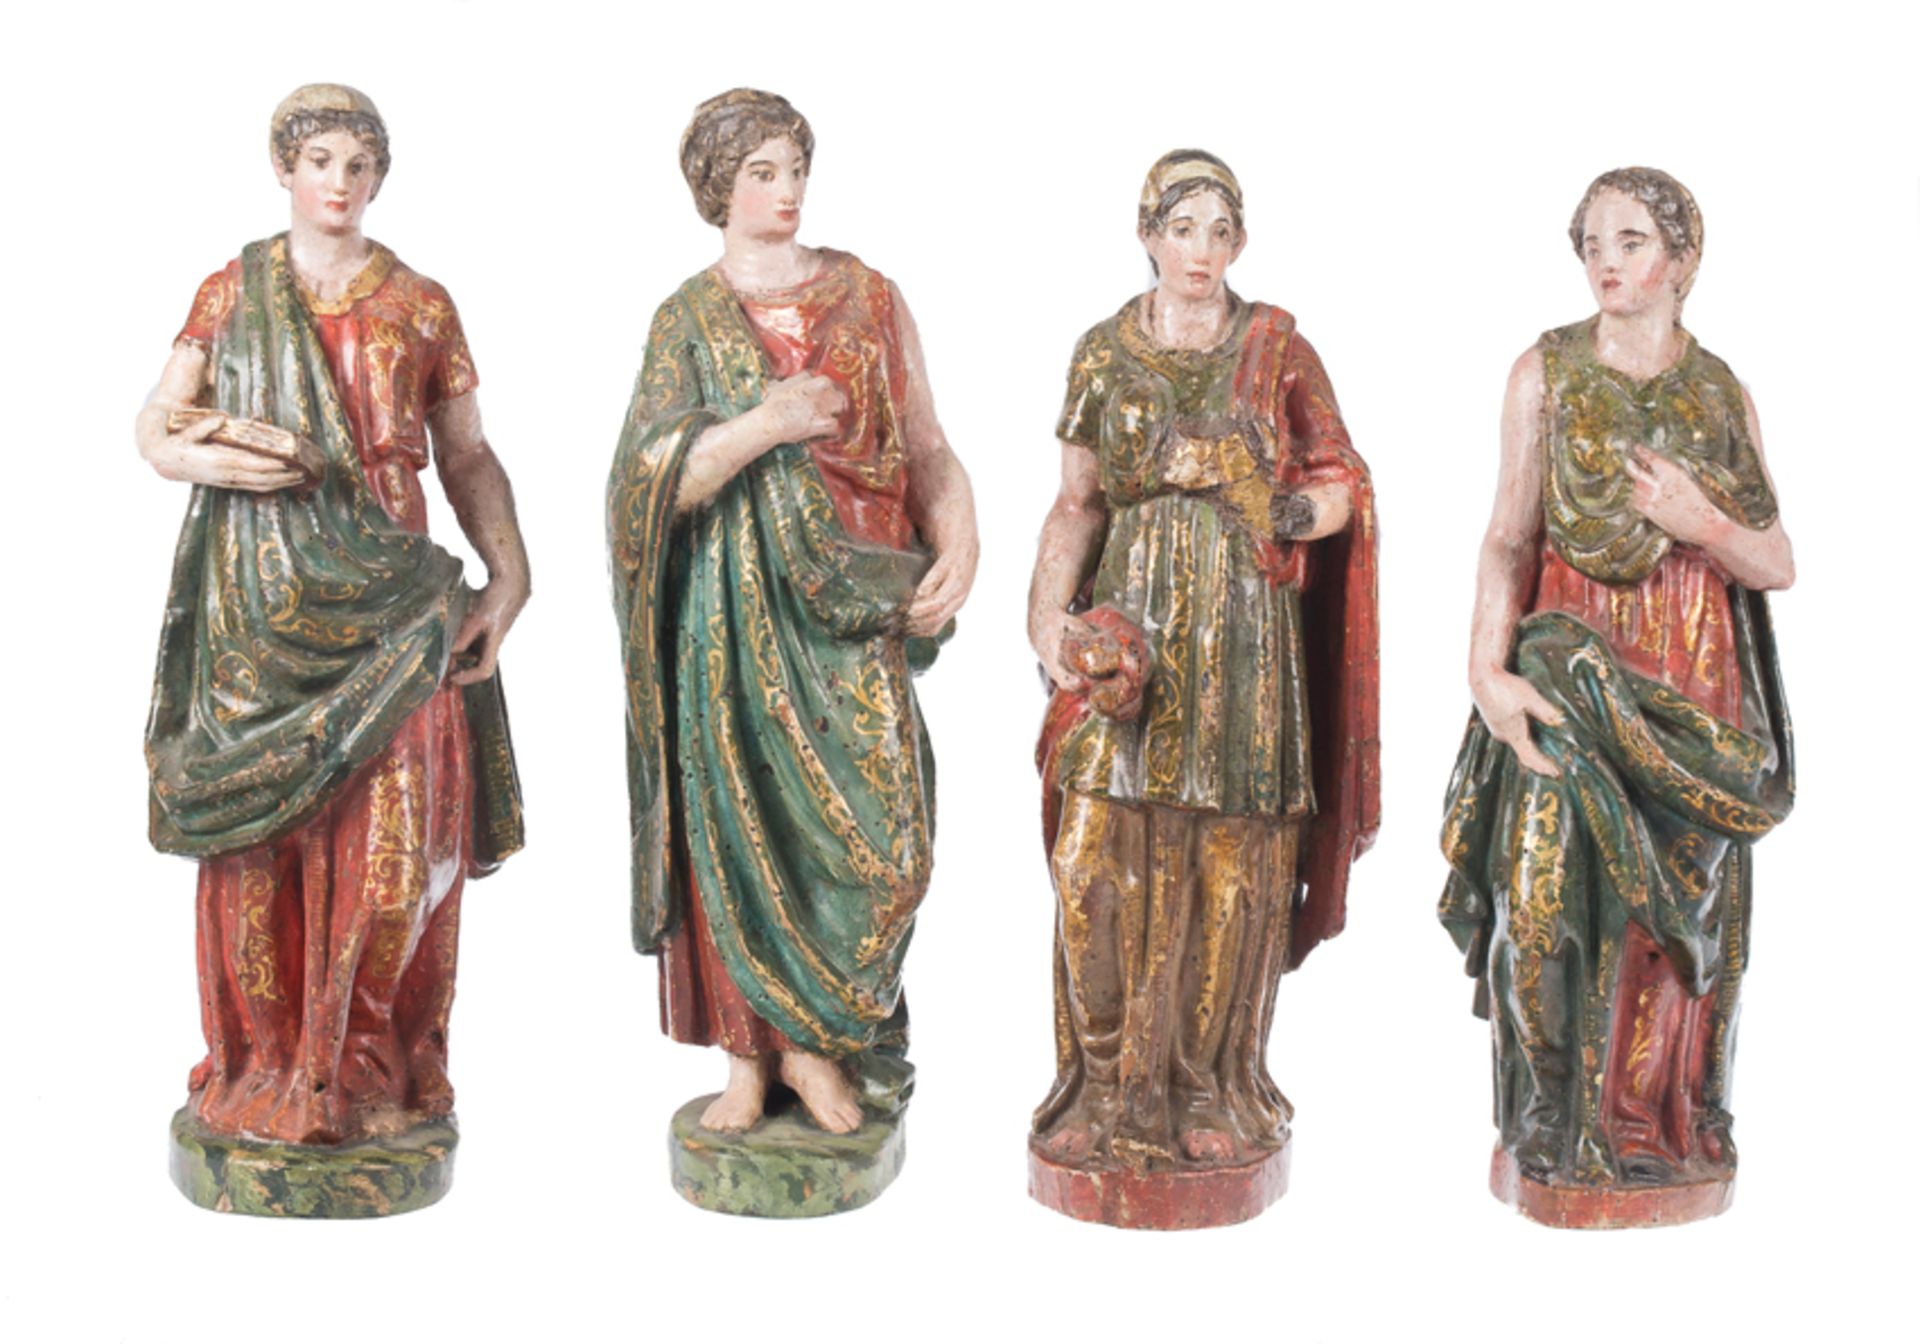 "Four Sibyls". Carved, gilded and polychromed wooden sculptures. Spanish Renaissance. Romanist Scho